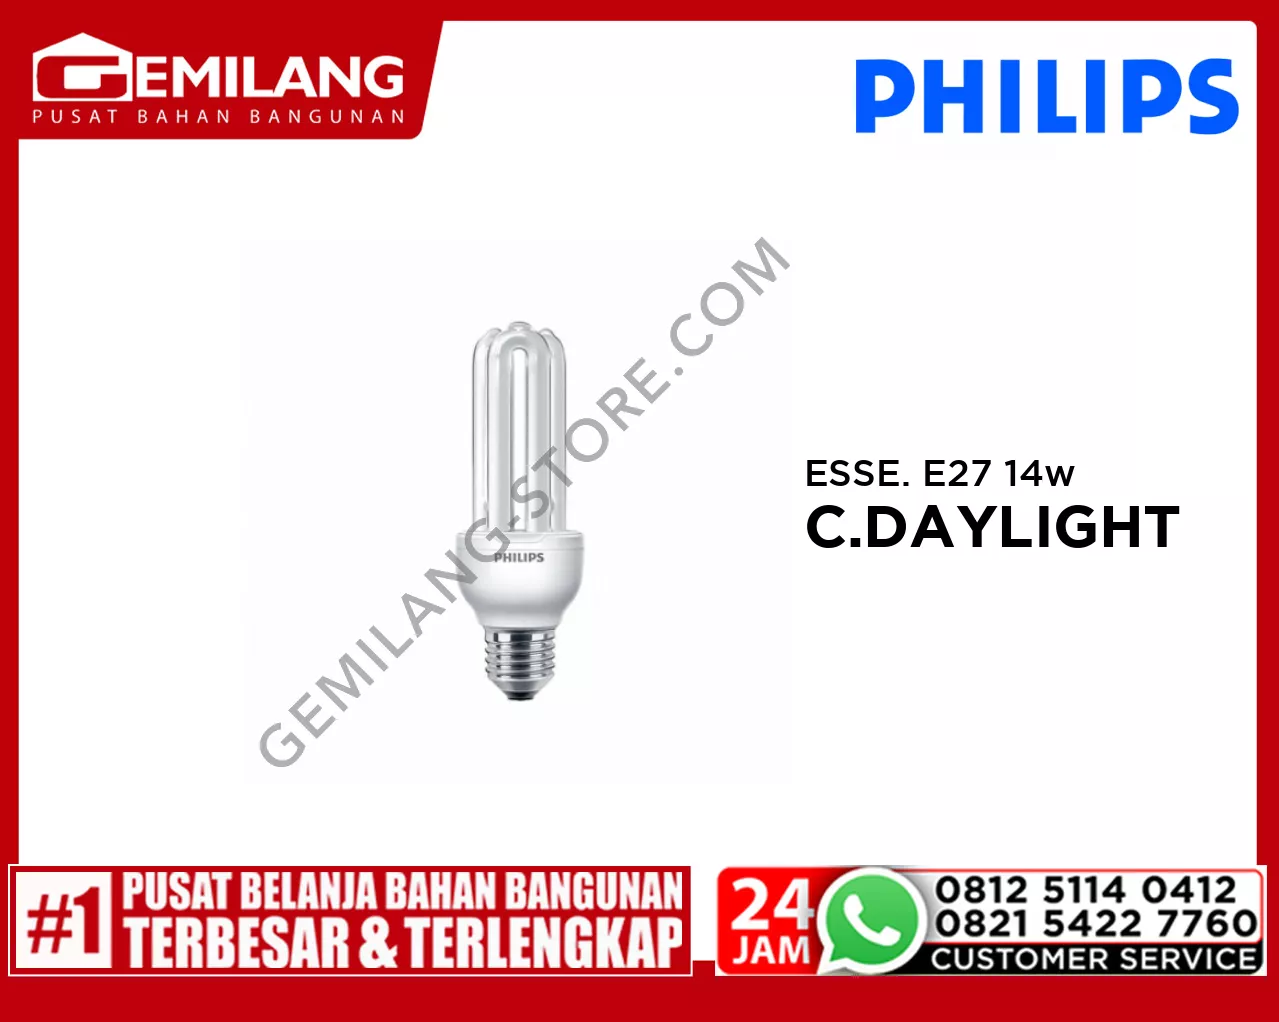 PHILIPS ESSENTIAL E27 COOL DAYLIGHT 14w